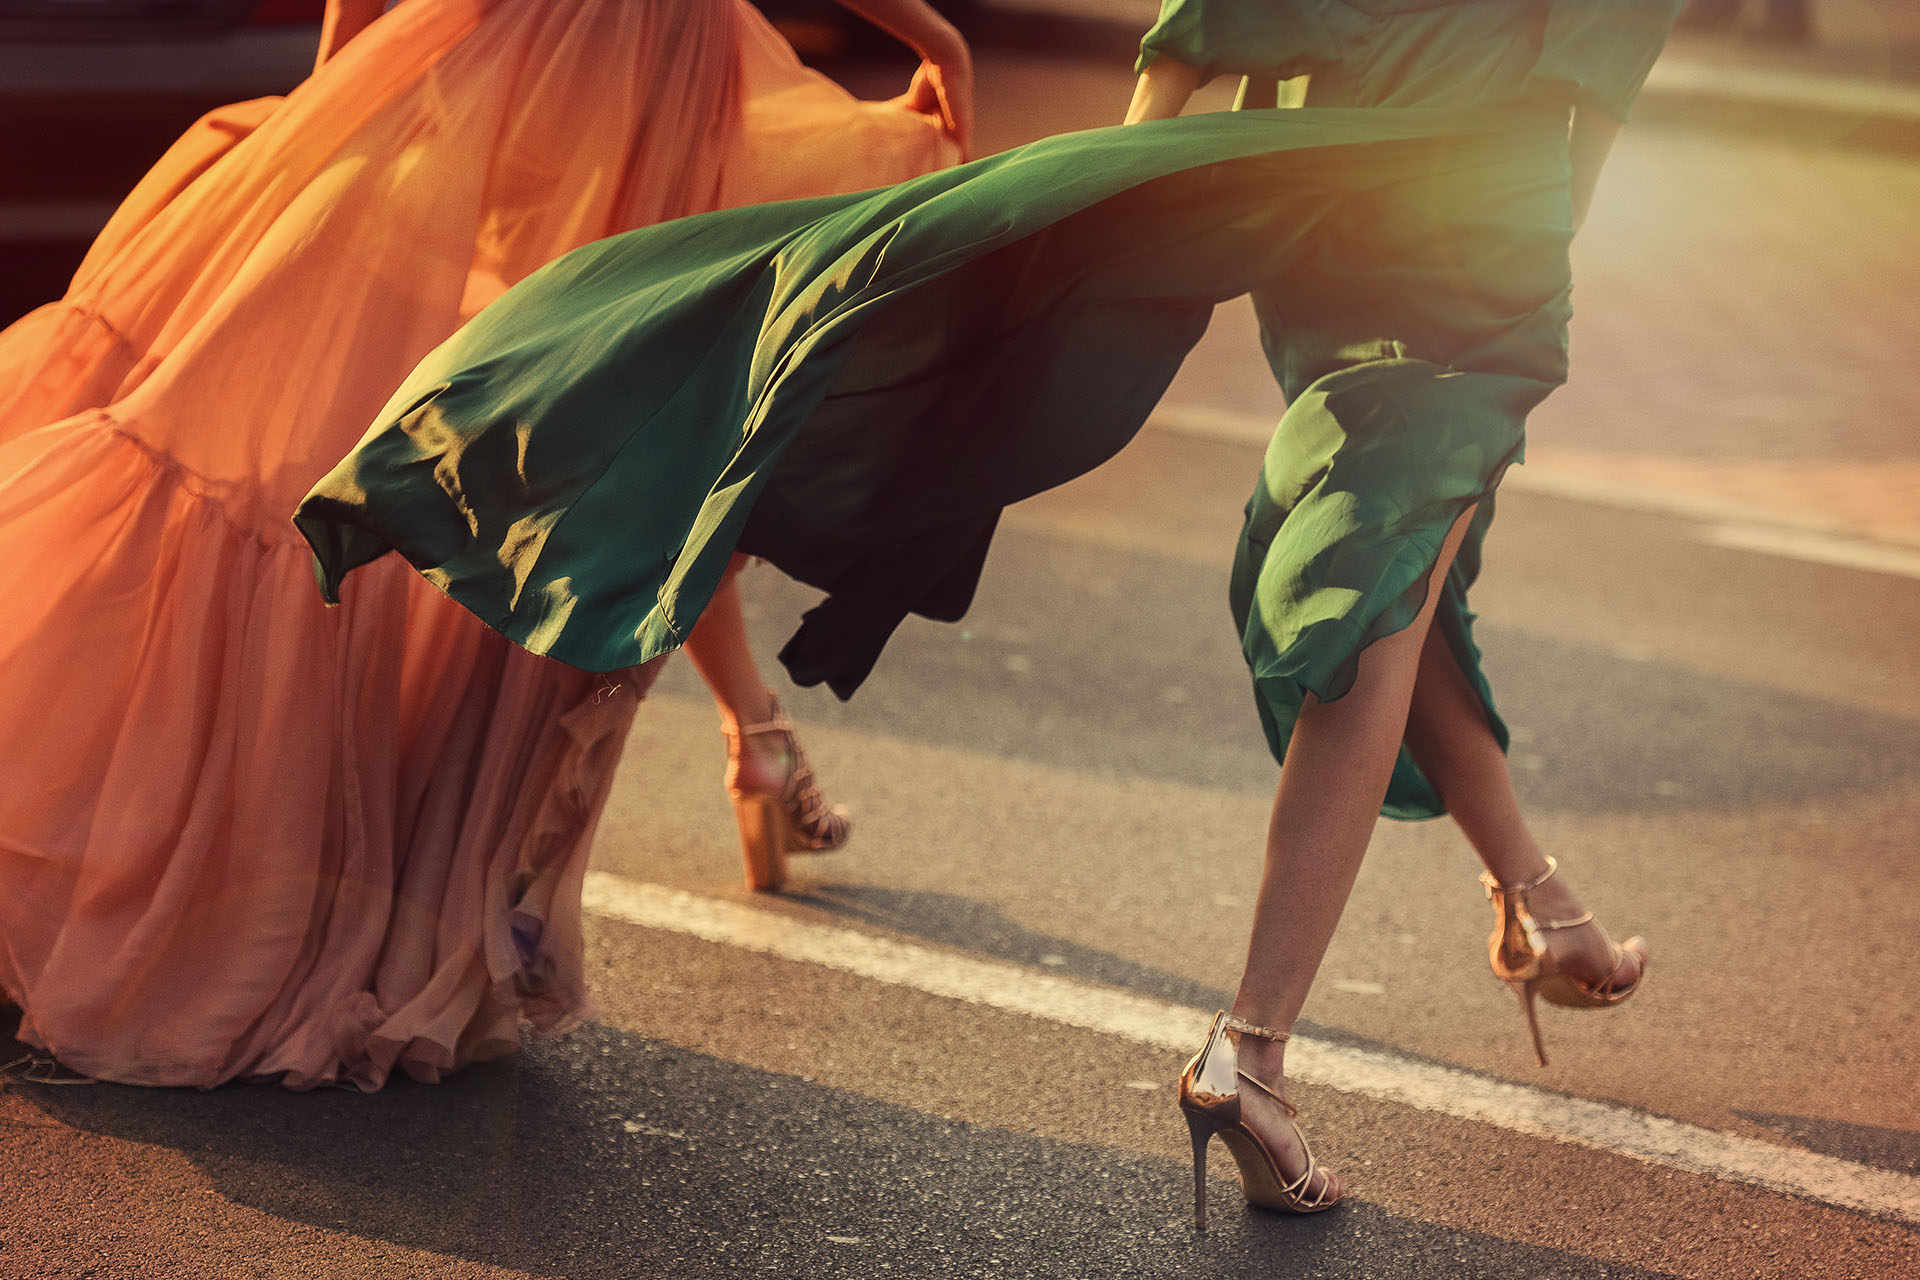 People in long dresses cross the street in high shoes